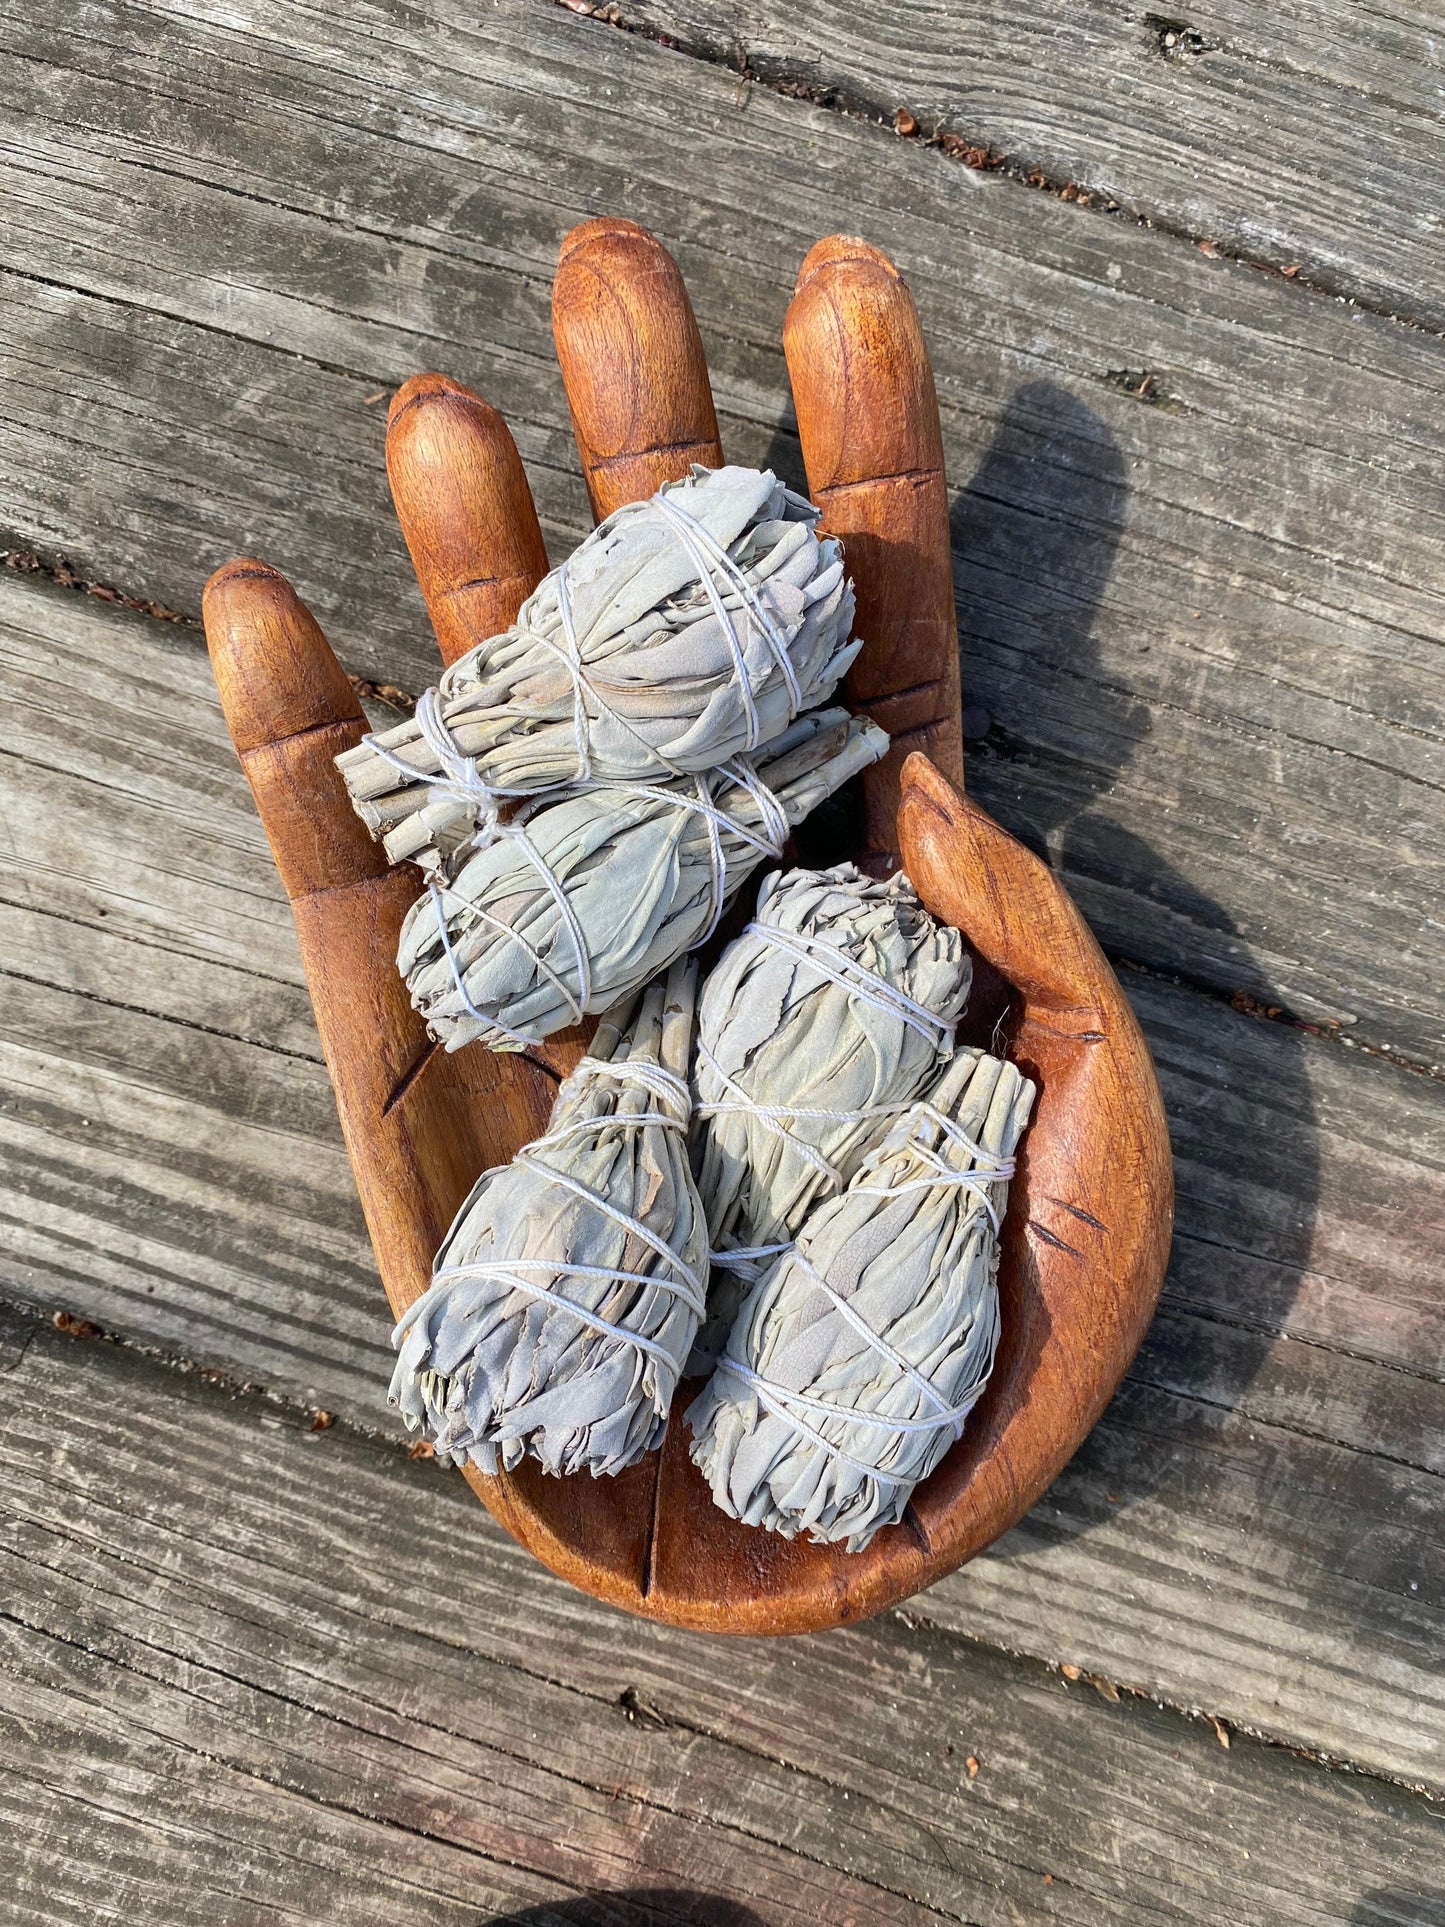 3 Sage Bundle / Smudging / Clear Away Negativity and stagnant energy / Cleanse Crystals